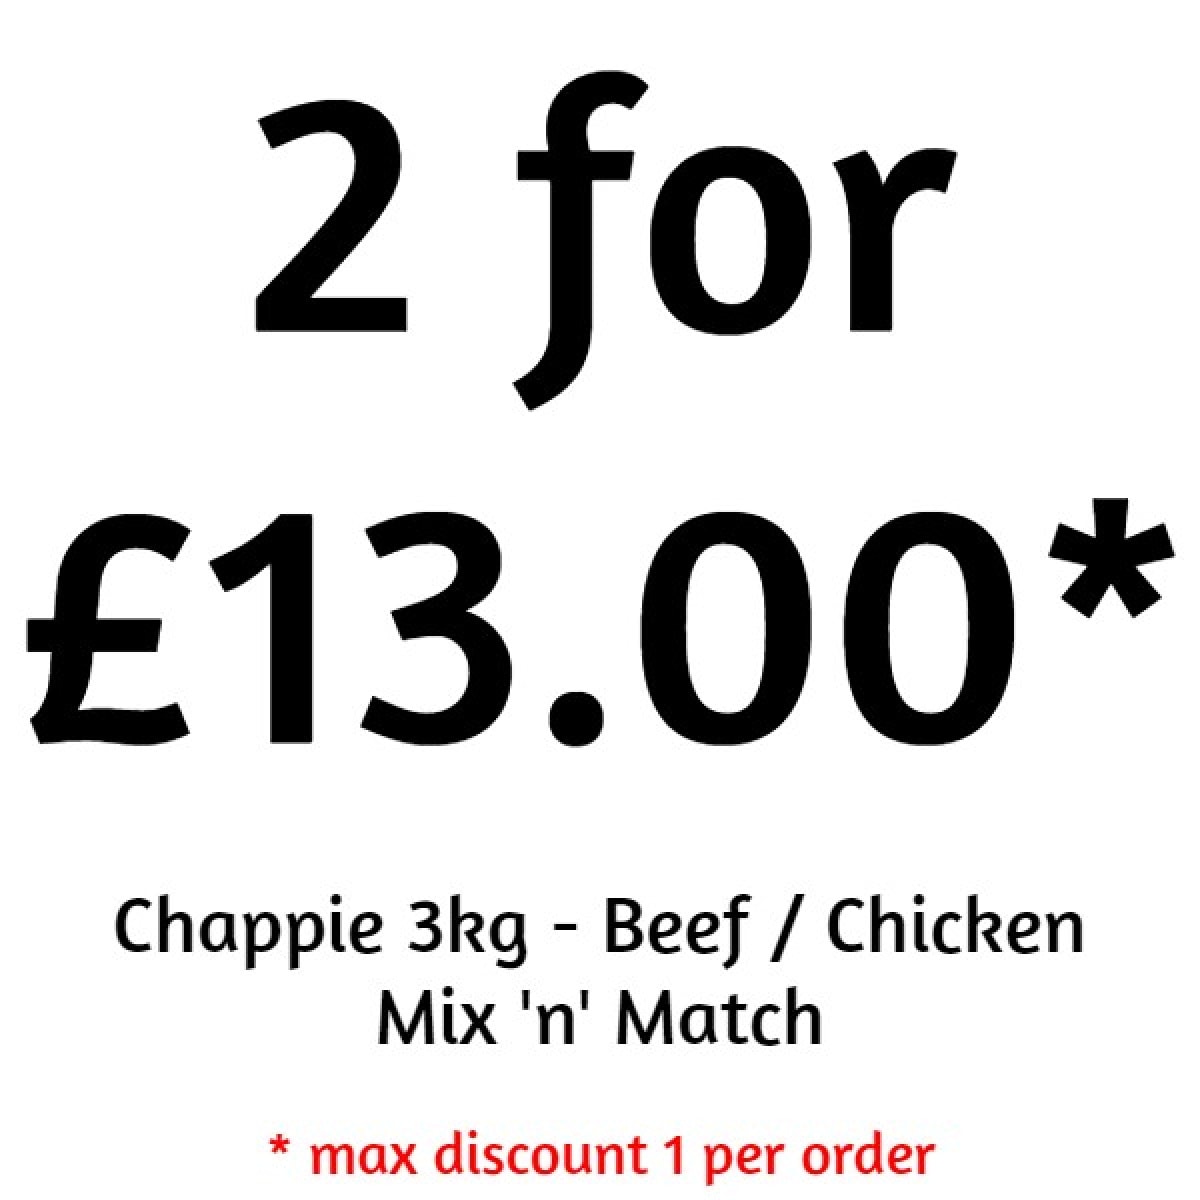 Chappie Beef & Wholegrain Cereal – Pawfect Supplies Ltd Product Image